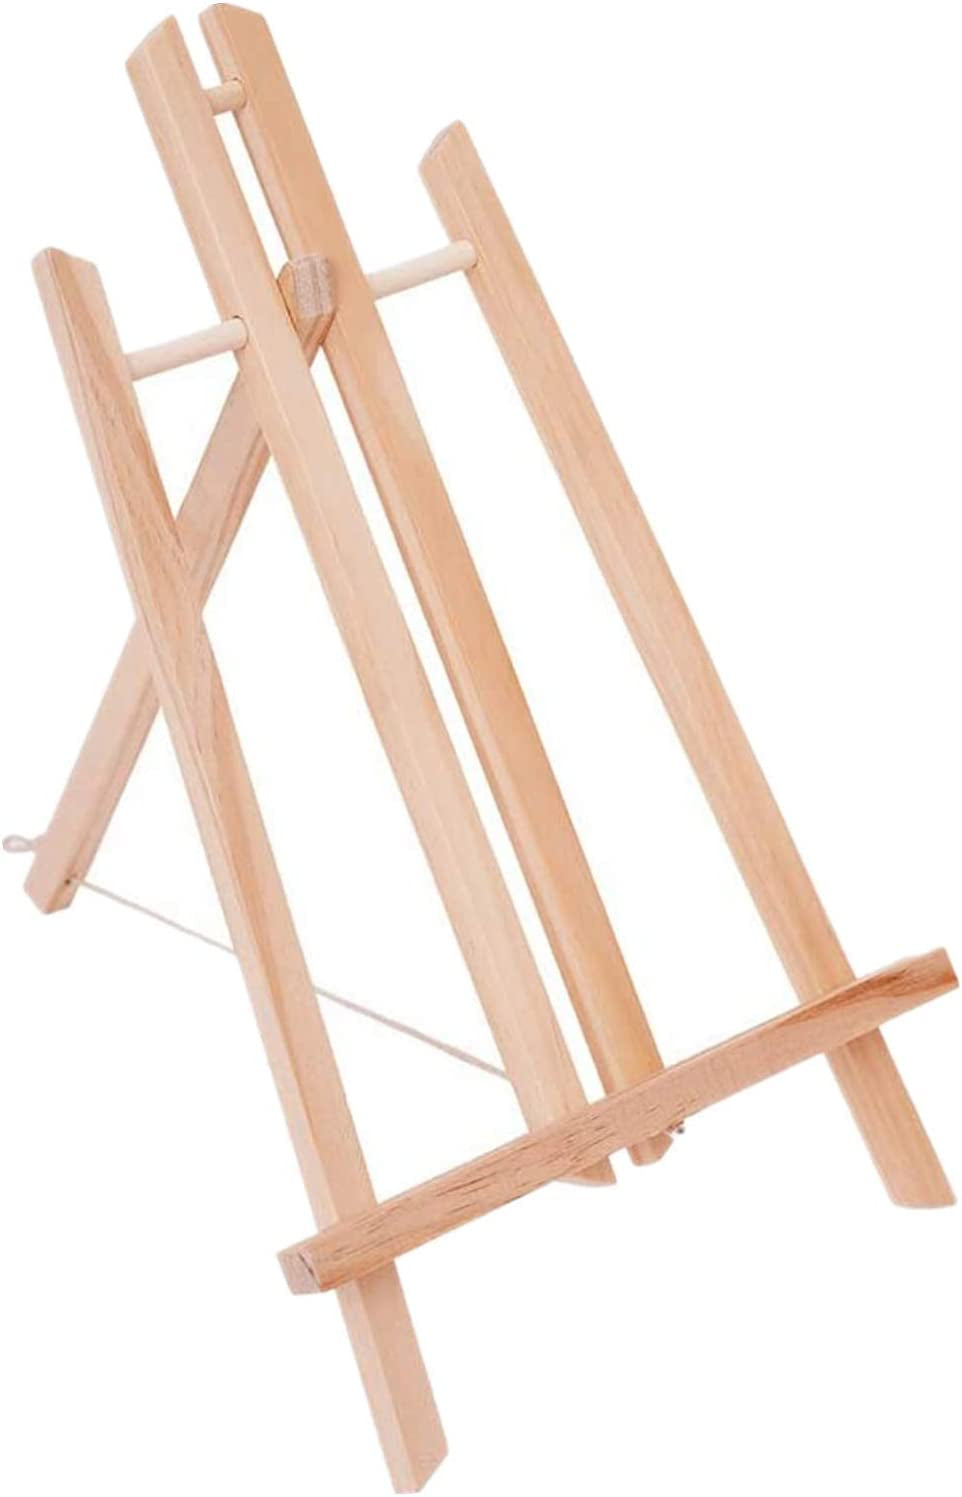 Wood Easels, Easel Stand for Painting Canvases, Art, and Crafts. (11.8  inch, 20 Pack), Tripod, Painting Party Easel, Kids Student Table School